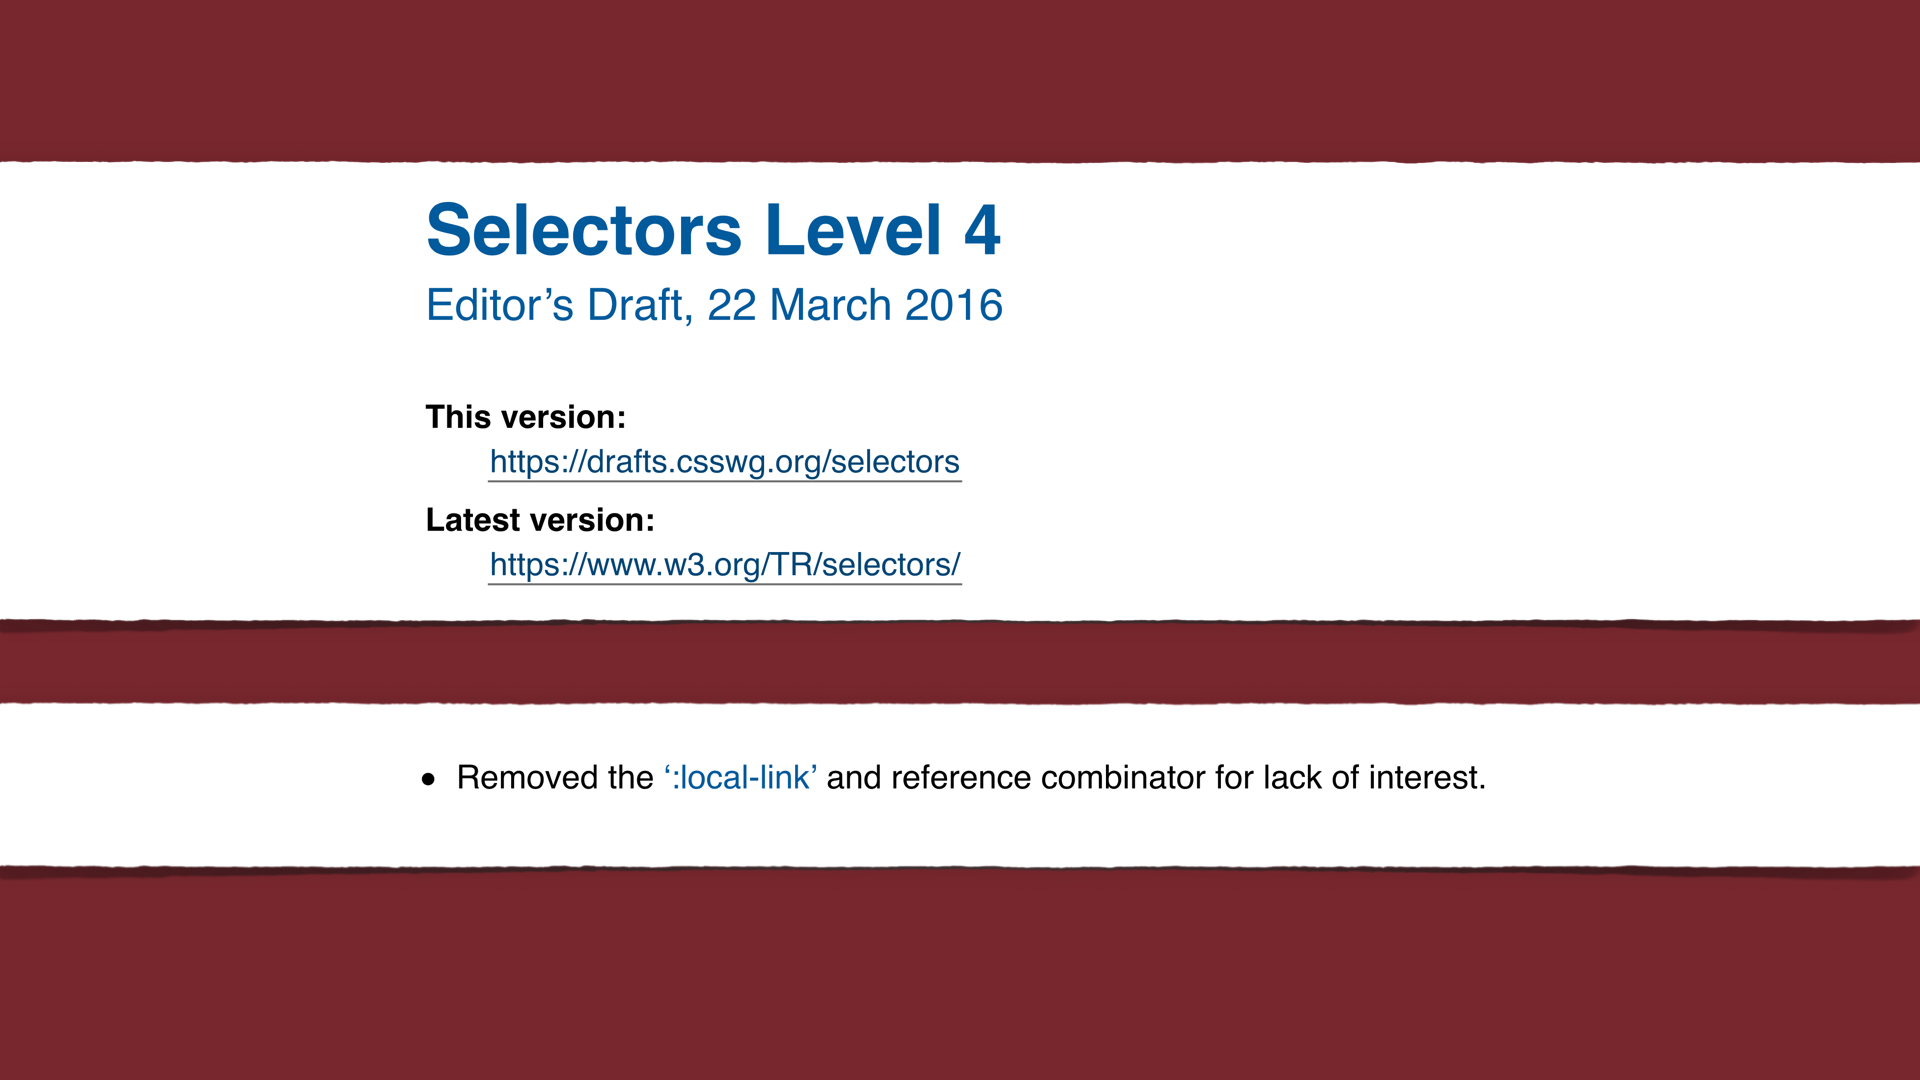 slide: Selectors Level 4 Editor’s Draft, 22 March 2016. “Removed the ‘:local-link’ and reference combinator for lack of interest.”